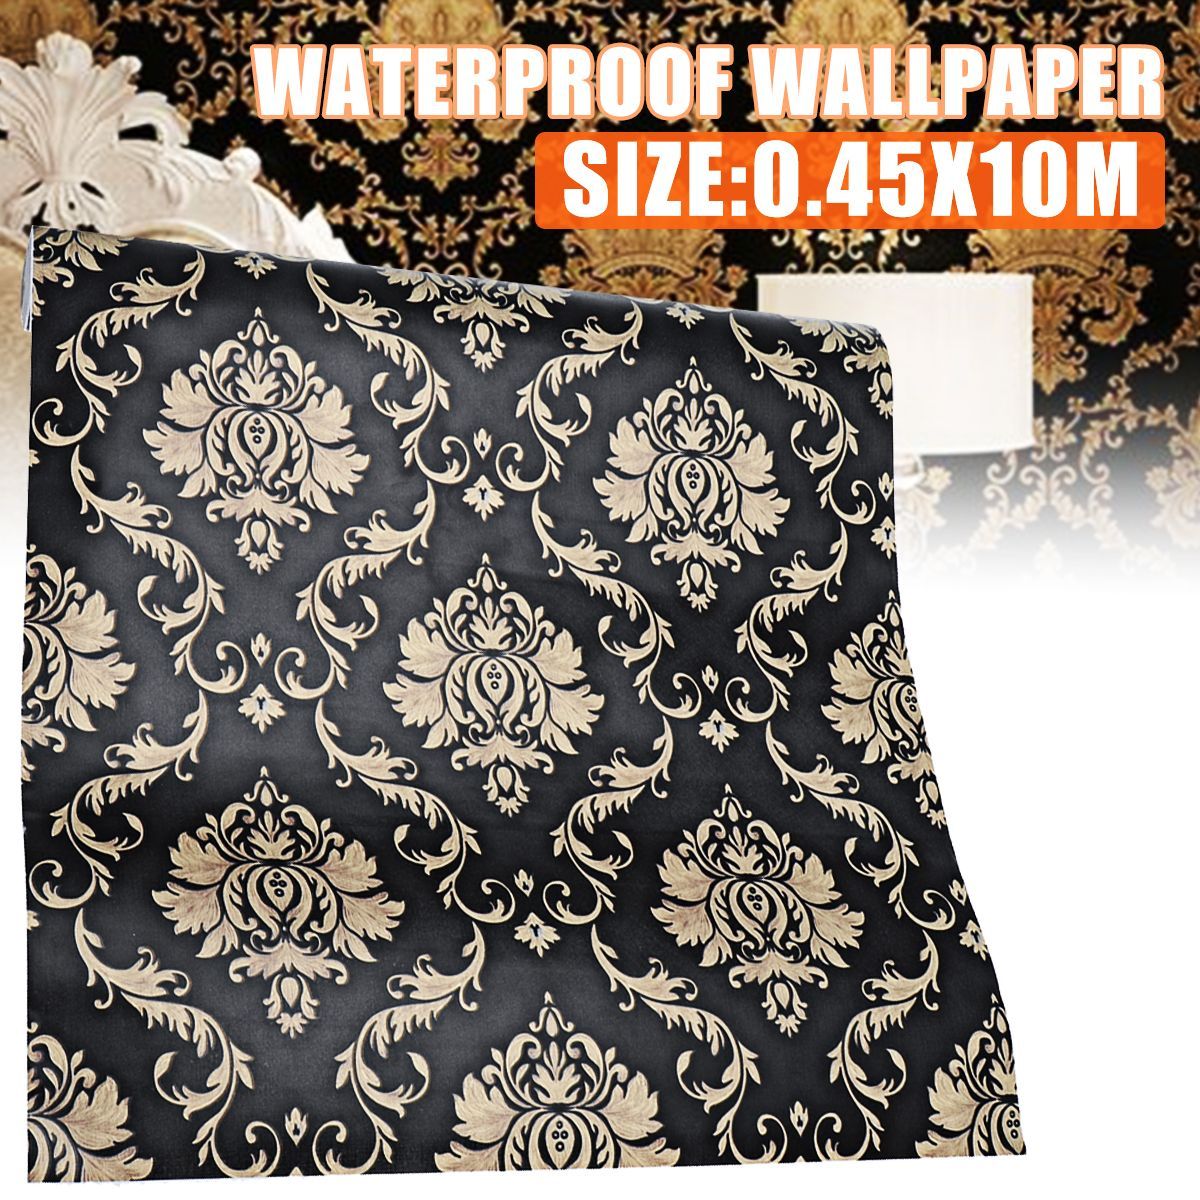 Vintage-Texture-Wall-Paper-Gold-3D-Damask-Pattern-Print-Wall-Roll-PVC-Decorations-1623281